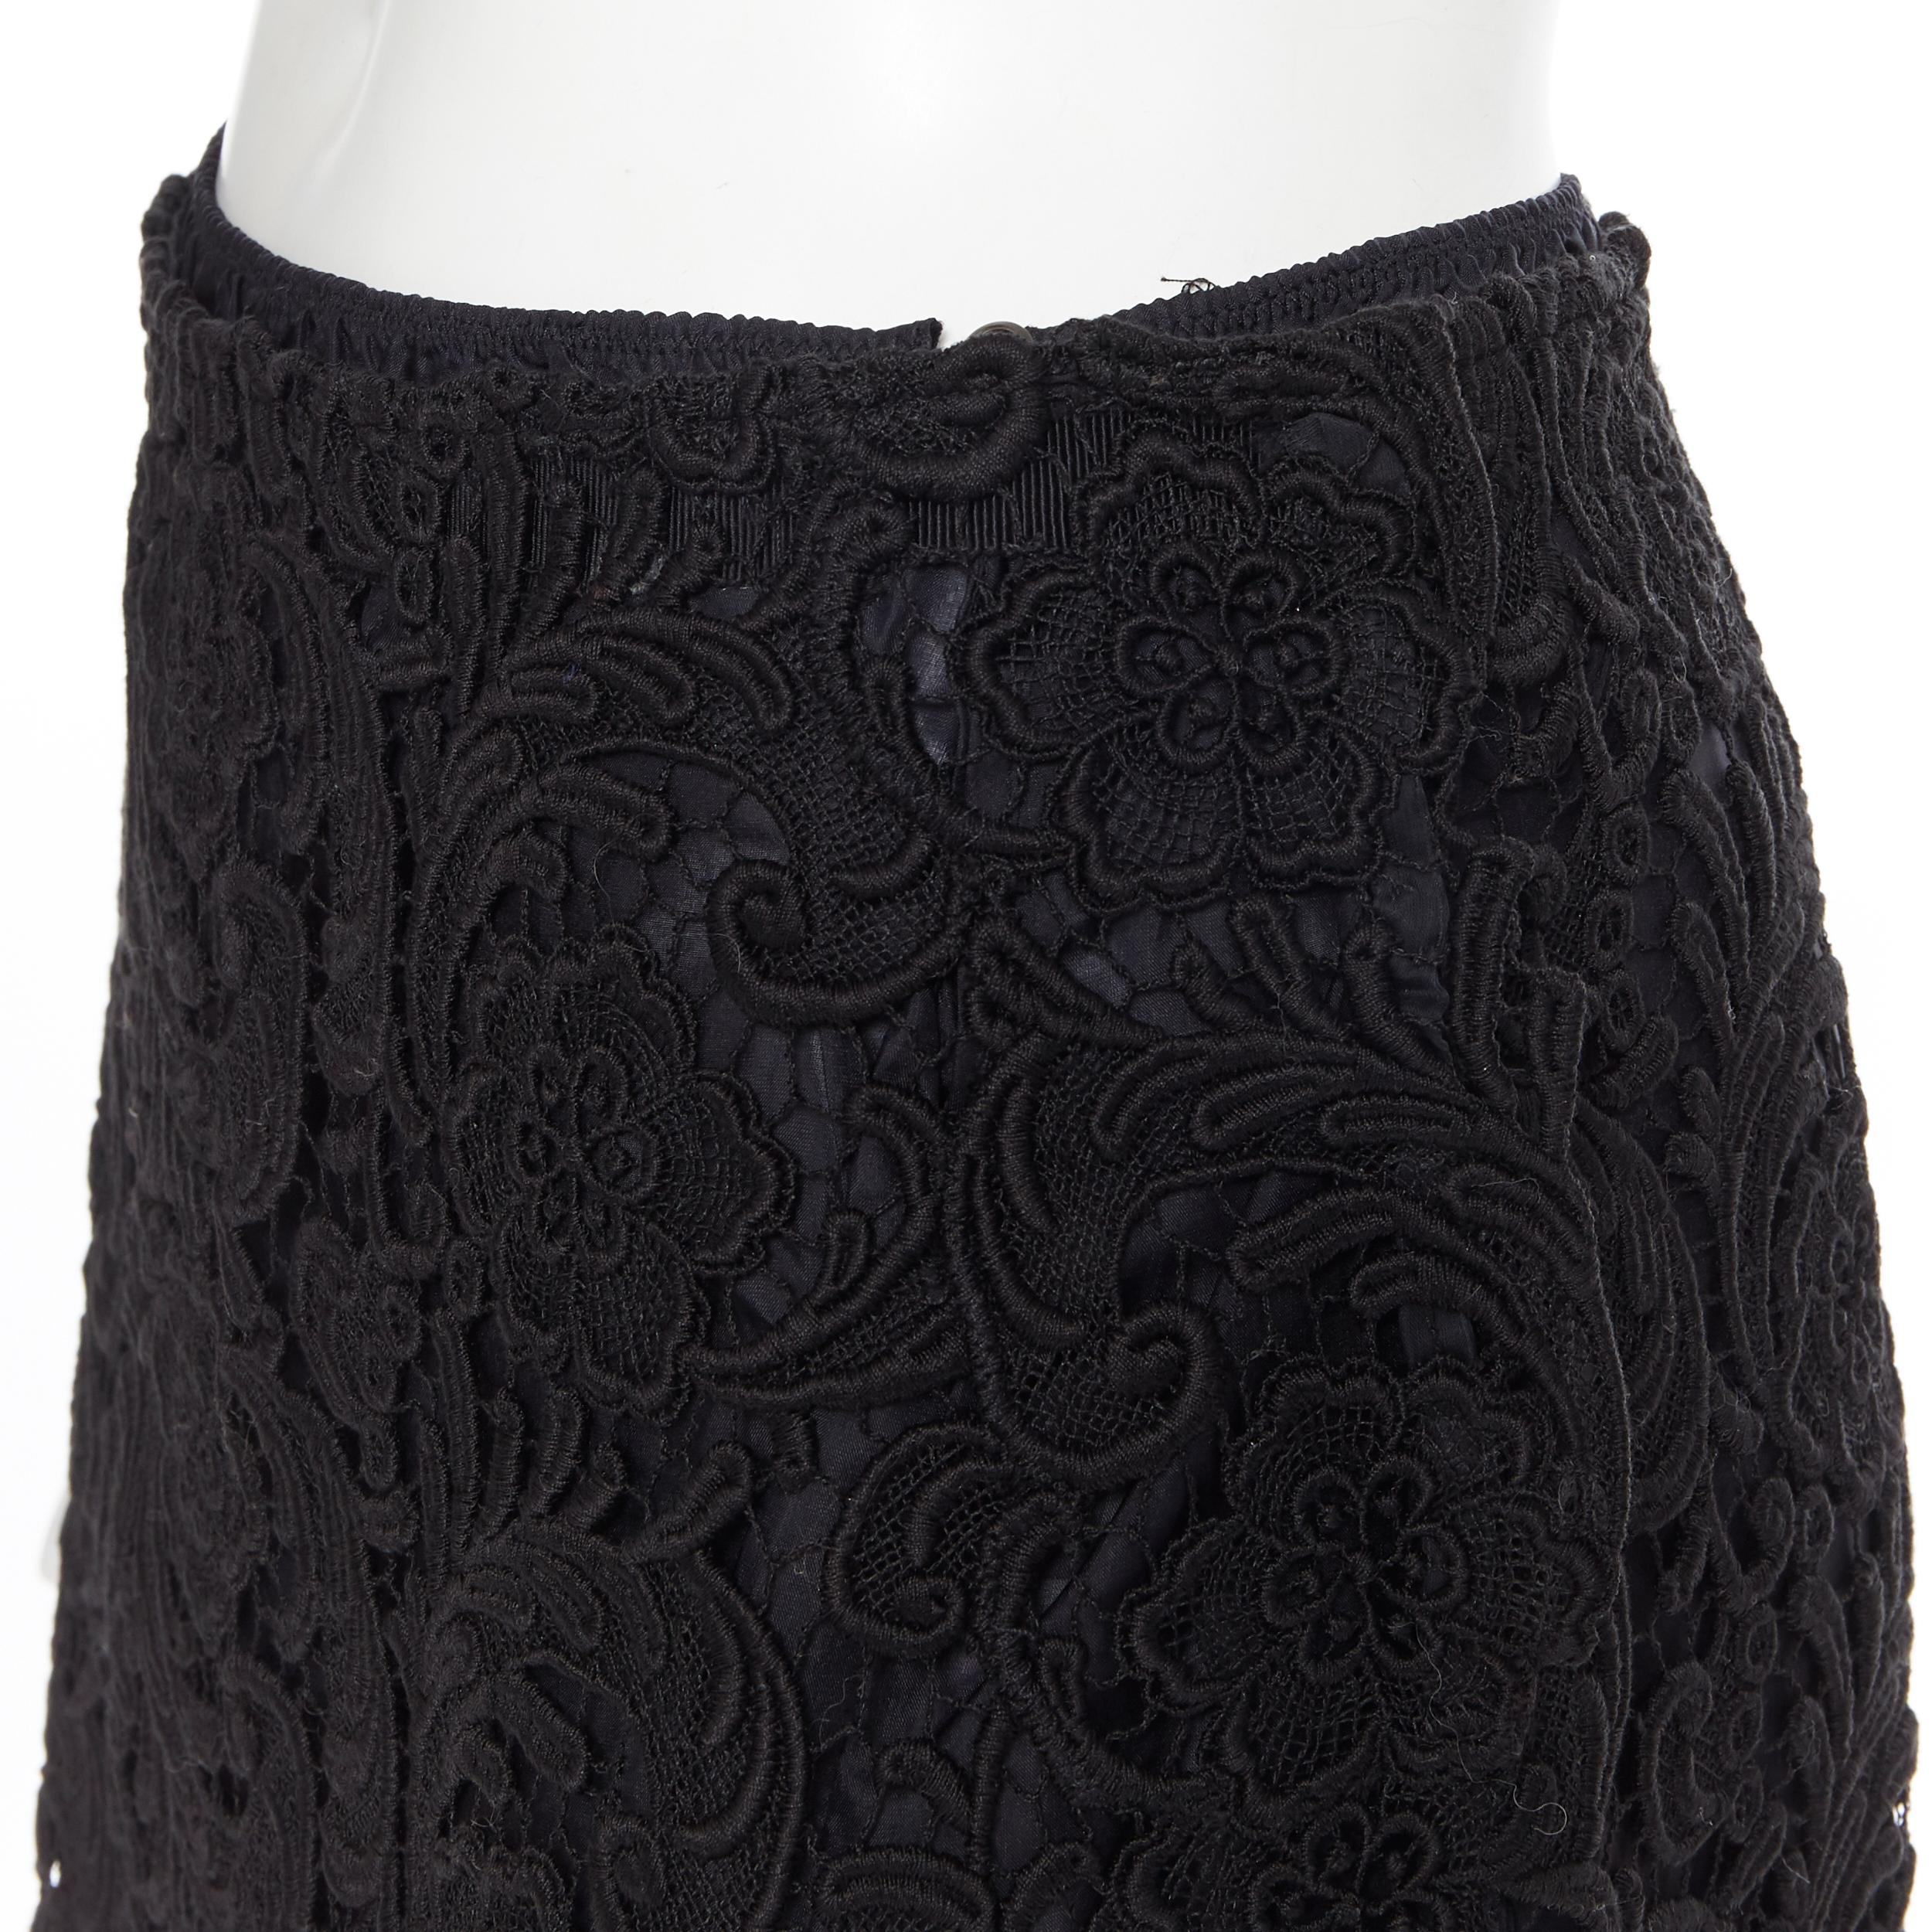 PRADA 2008 iconic floral embroidery lace black silk lined mini skirt IT38 XS
Brand: Prada
Designer: Miuccia Prada
Collection: 2008
Model Name / Style: Lace skirt
Material: Lace, silk
Color: Black
Pattern: Floral
Closure: Hook & eye
Extra Detail: